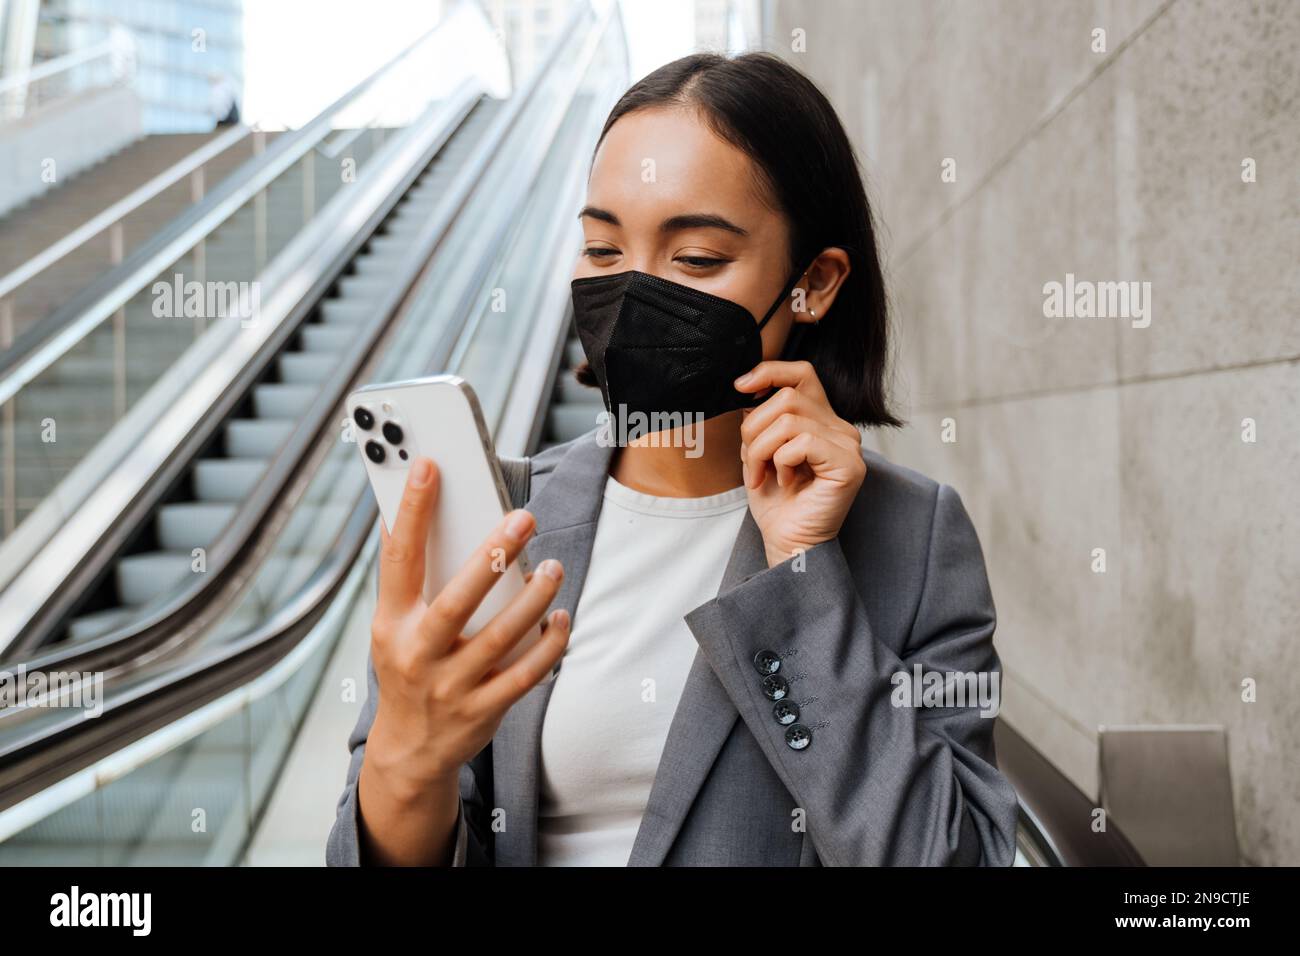 Young asian woman in medical mask looking at mobile phone screen while standing on escalator Stock Photo